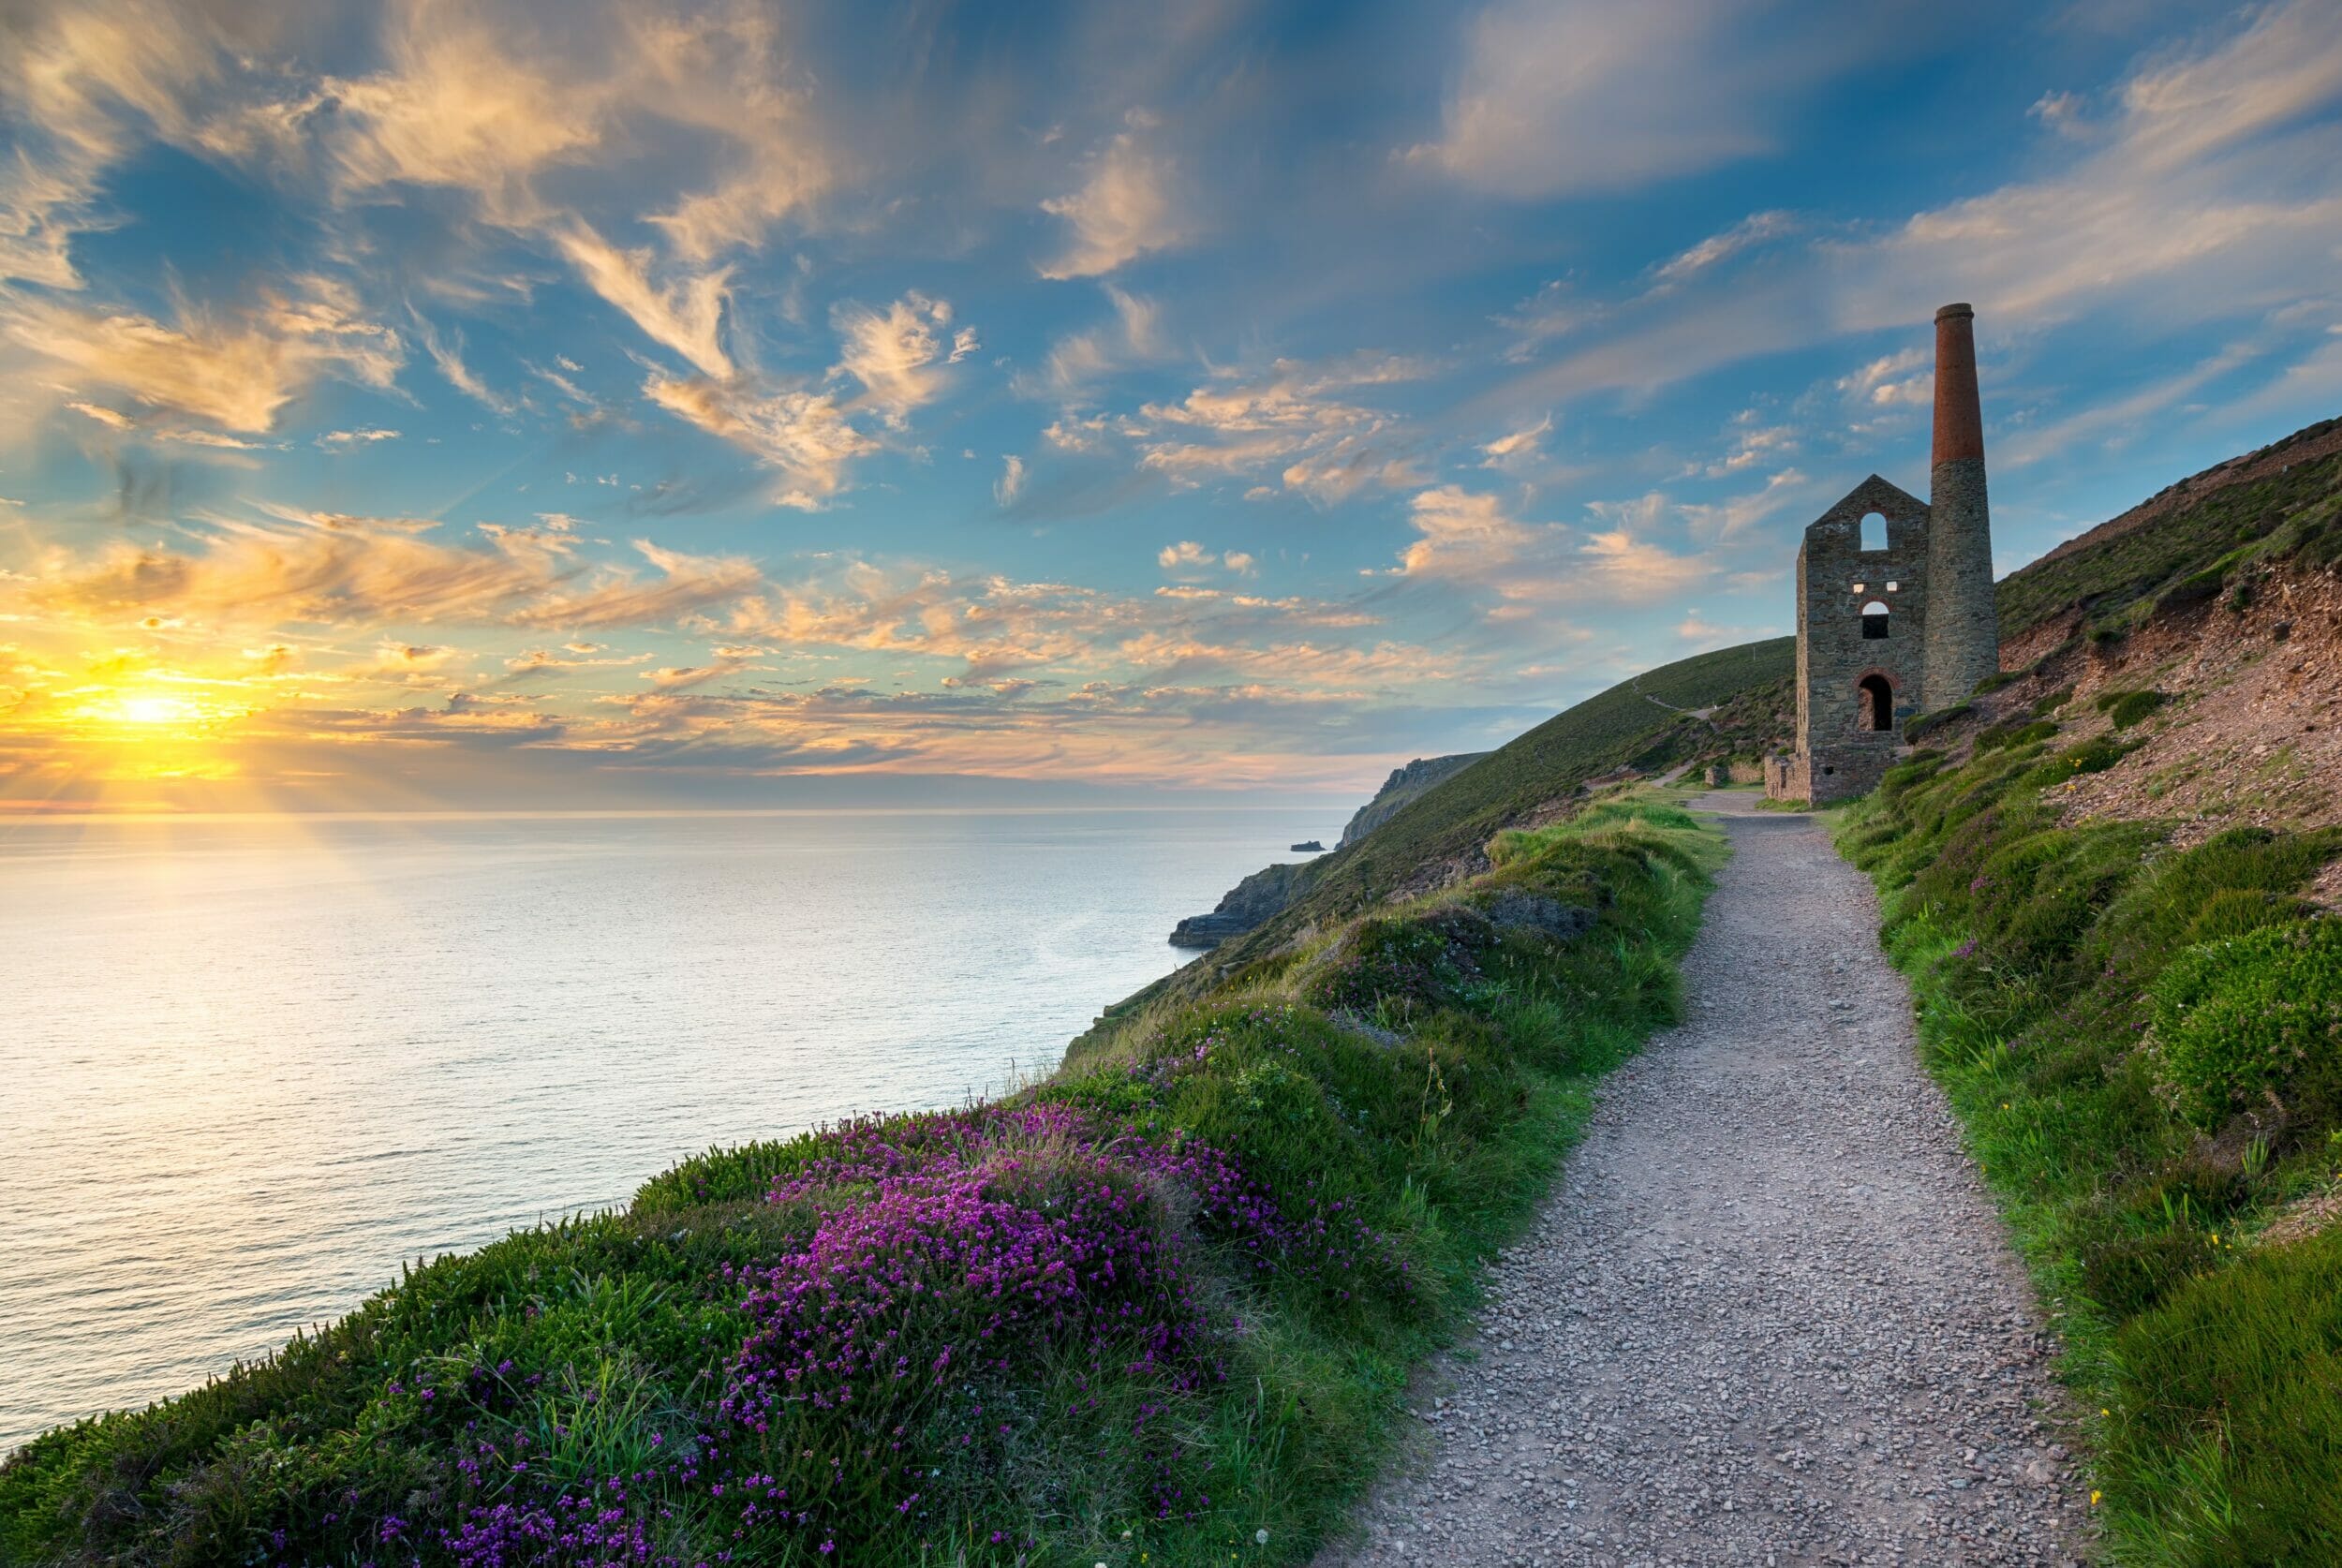 From Beaches to Coastal Towns: Explore the South Coast for your UK Holiday